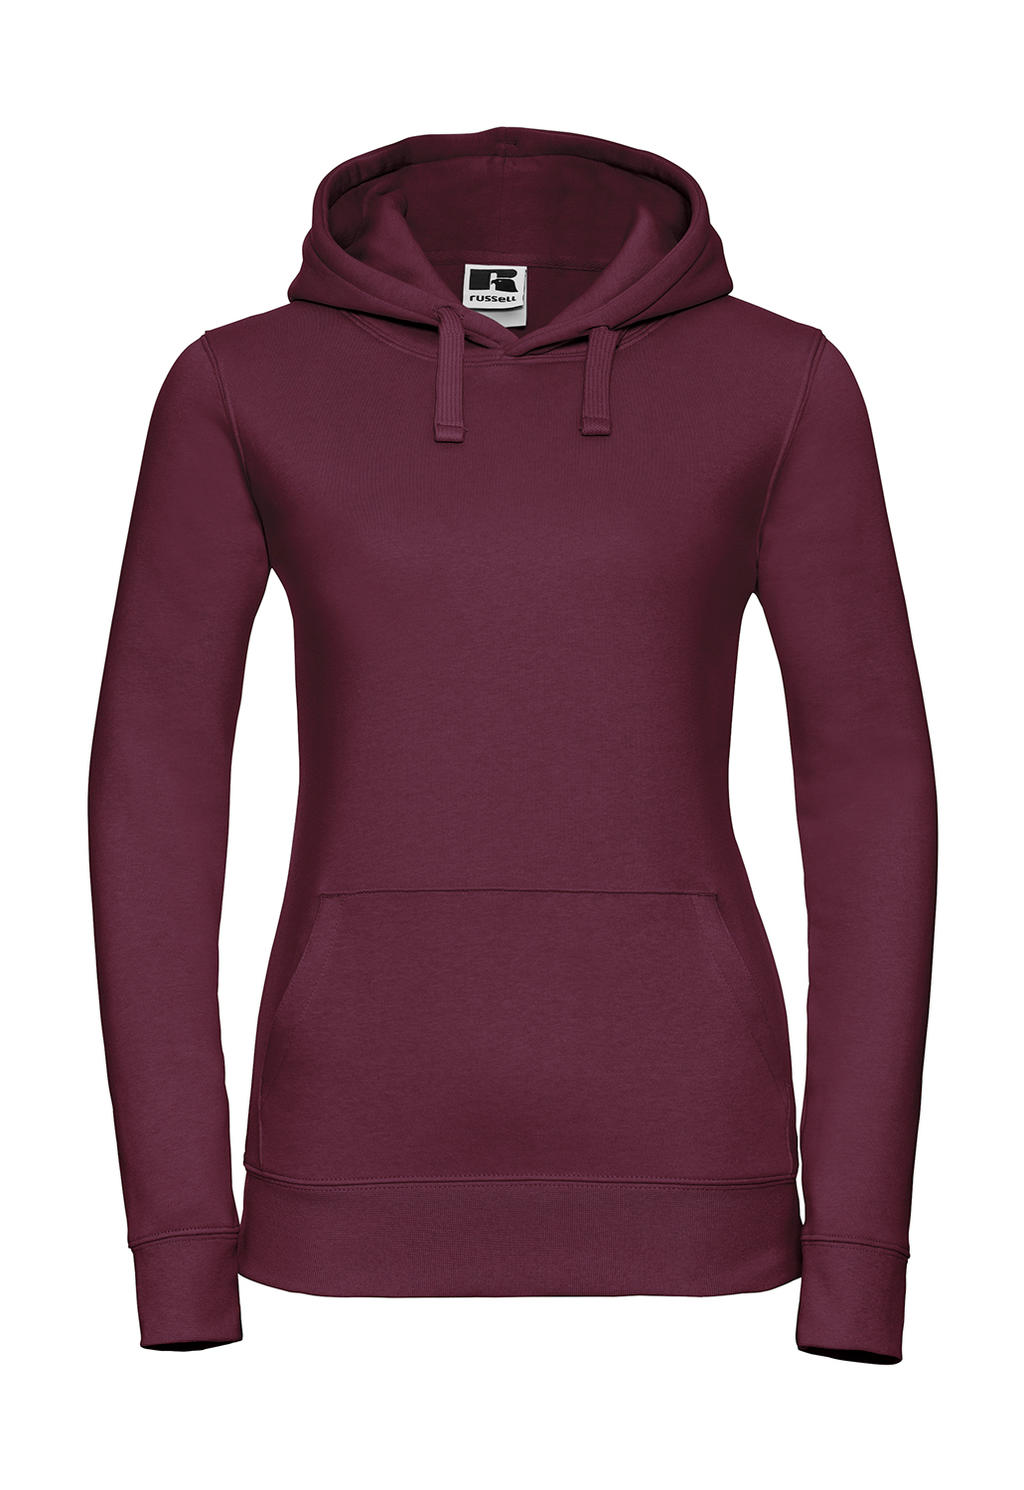  Ladies Authentic Hooded Sweat in Farbe Burgundy